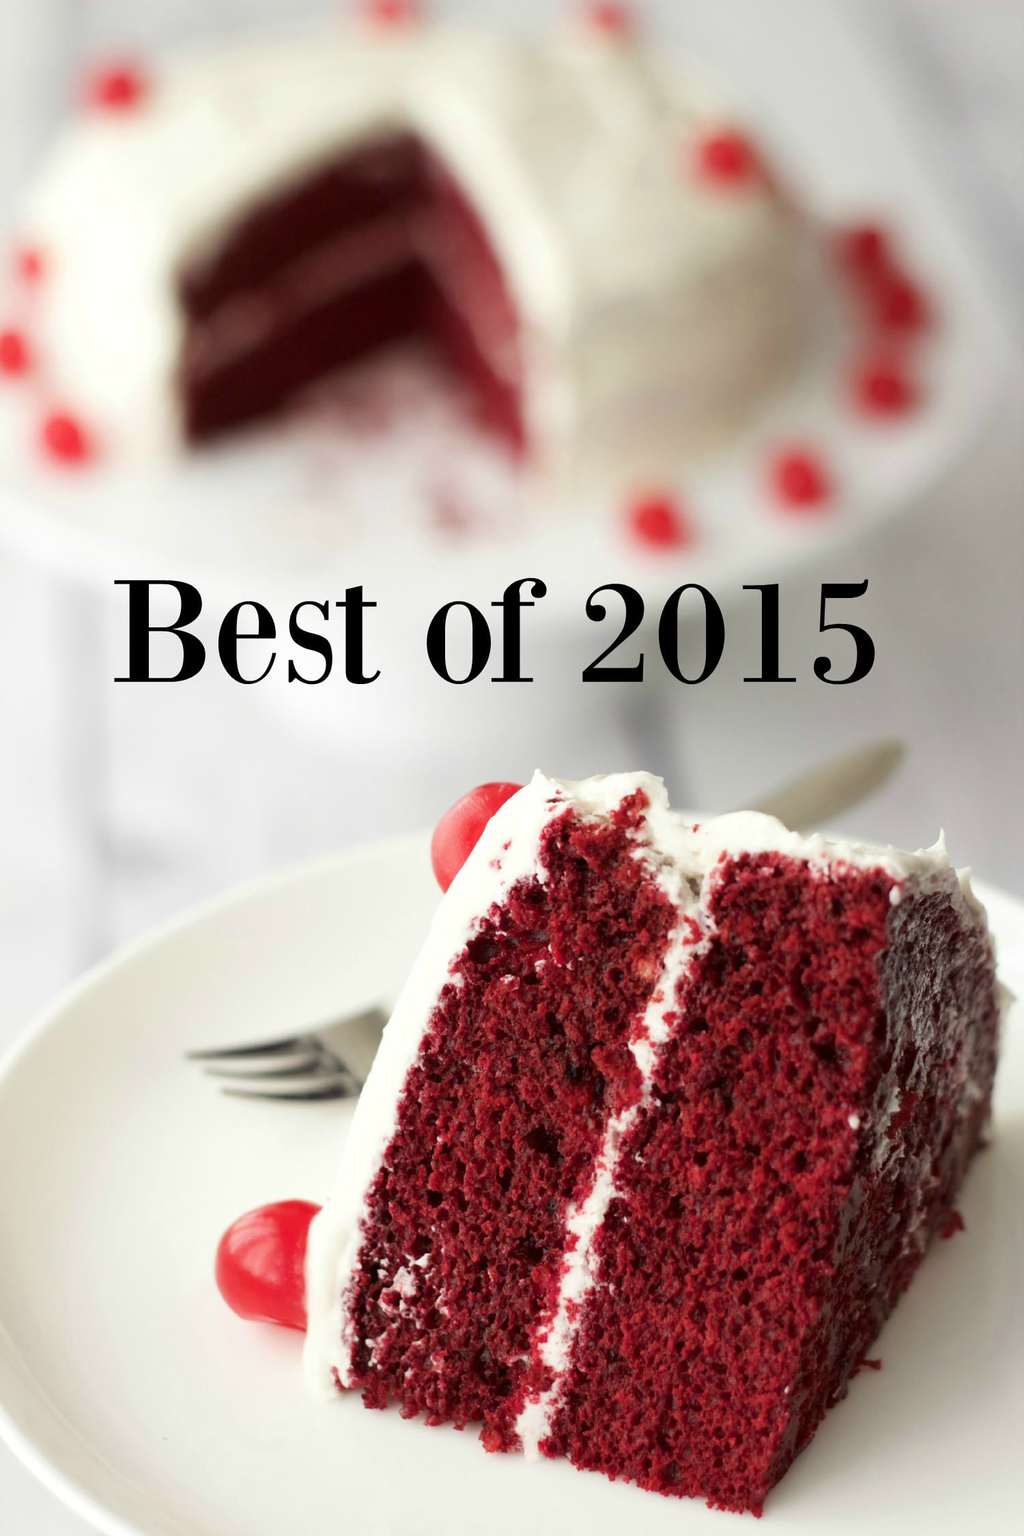 The Best of 2015 – A Year in Review – The good, the bad and the great!